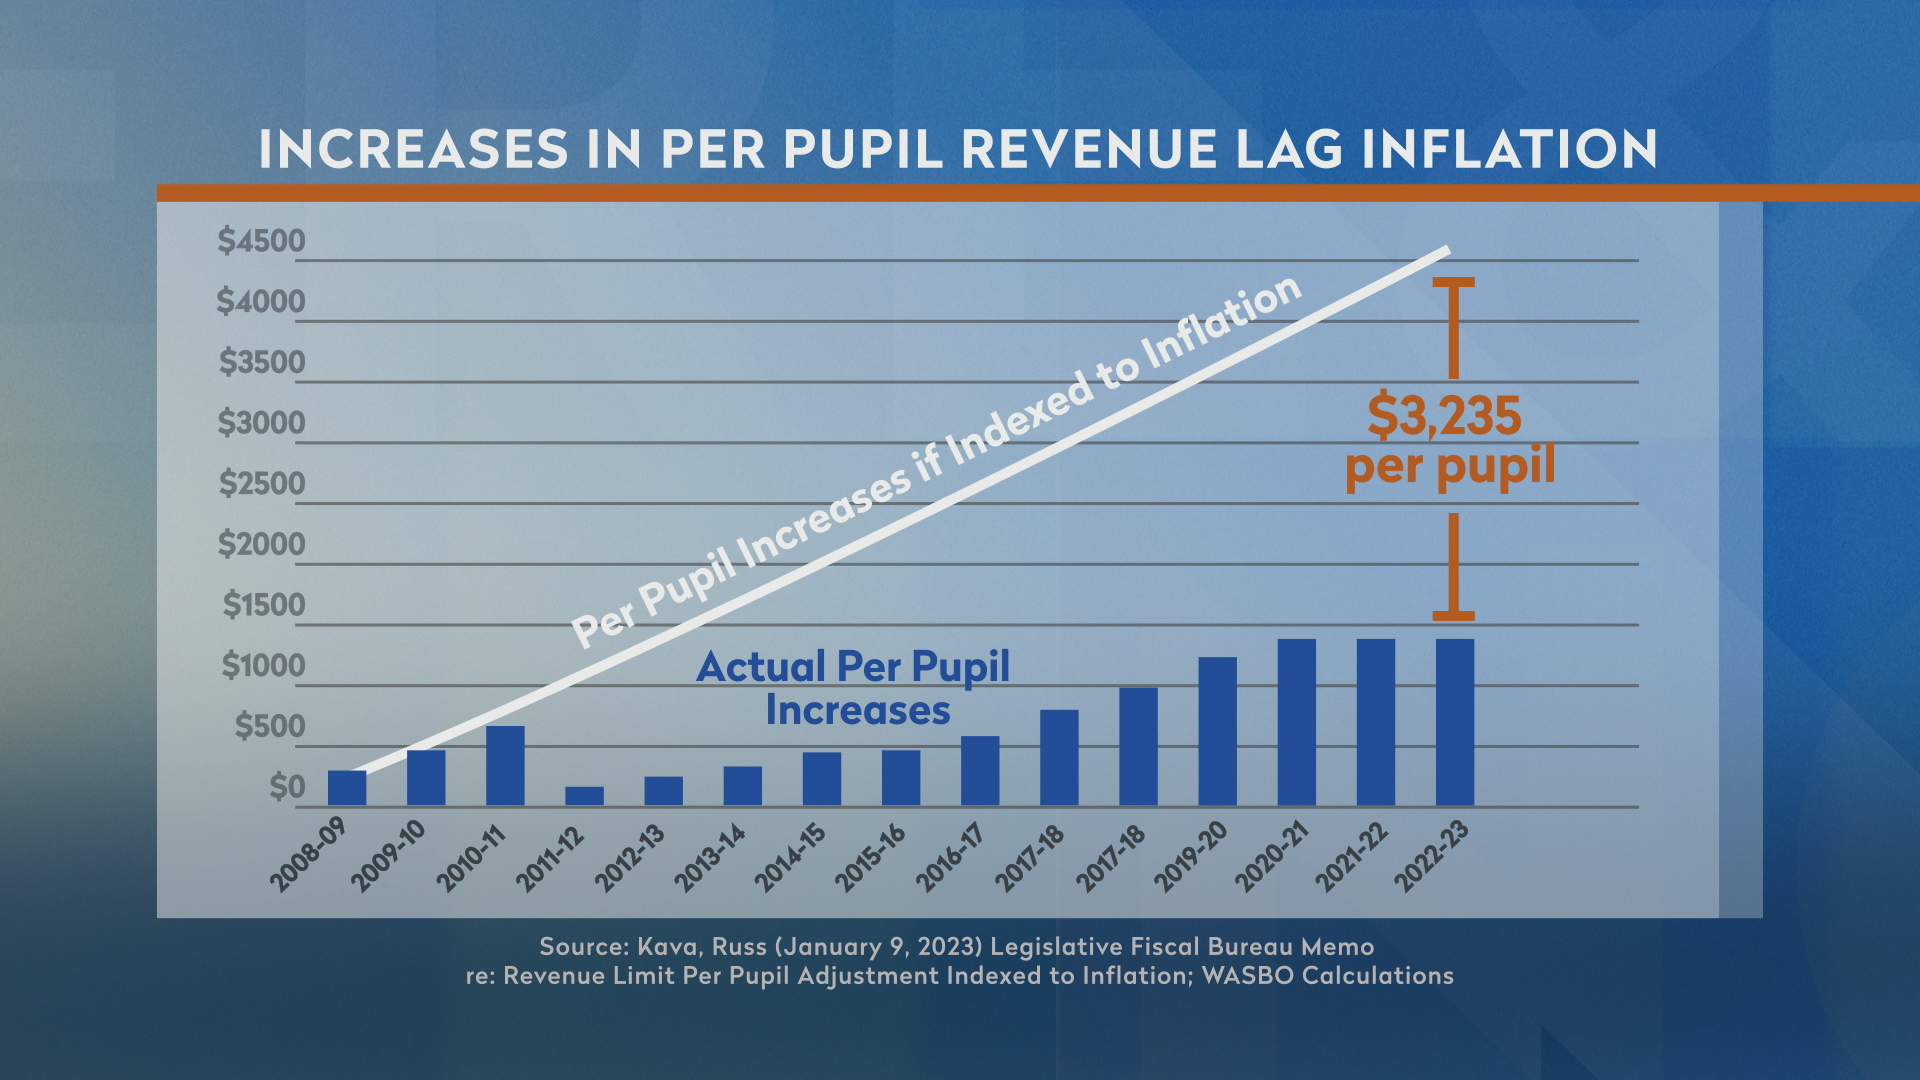 A bar chart with the title "Increases in Per Pupil Revenue Lag Inflation" shows the dollar amount of "Actual Per Pupil Increases" each school year between 2008-09 and 2022-23, with an upward sloping line reading "Per Pupil Increases if Indexed to Inflation" and a vertical line in the 2022-23 column with the label "$3,325 per pupil" between the bar and line.